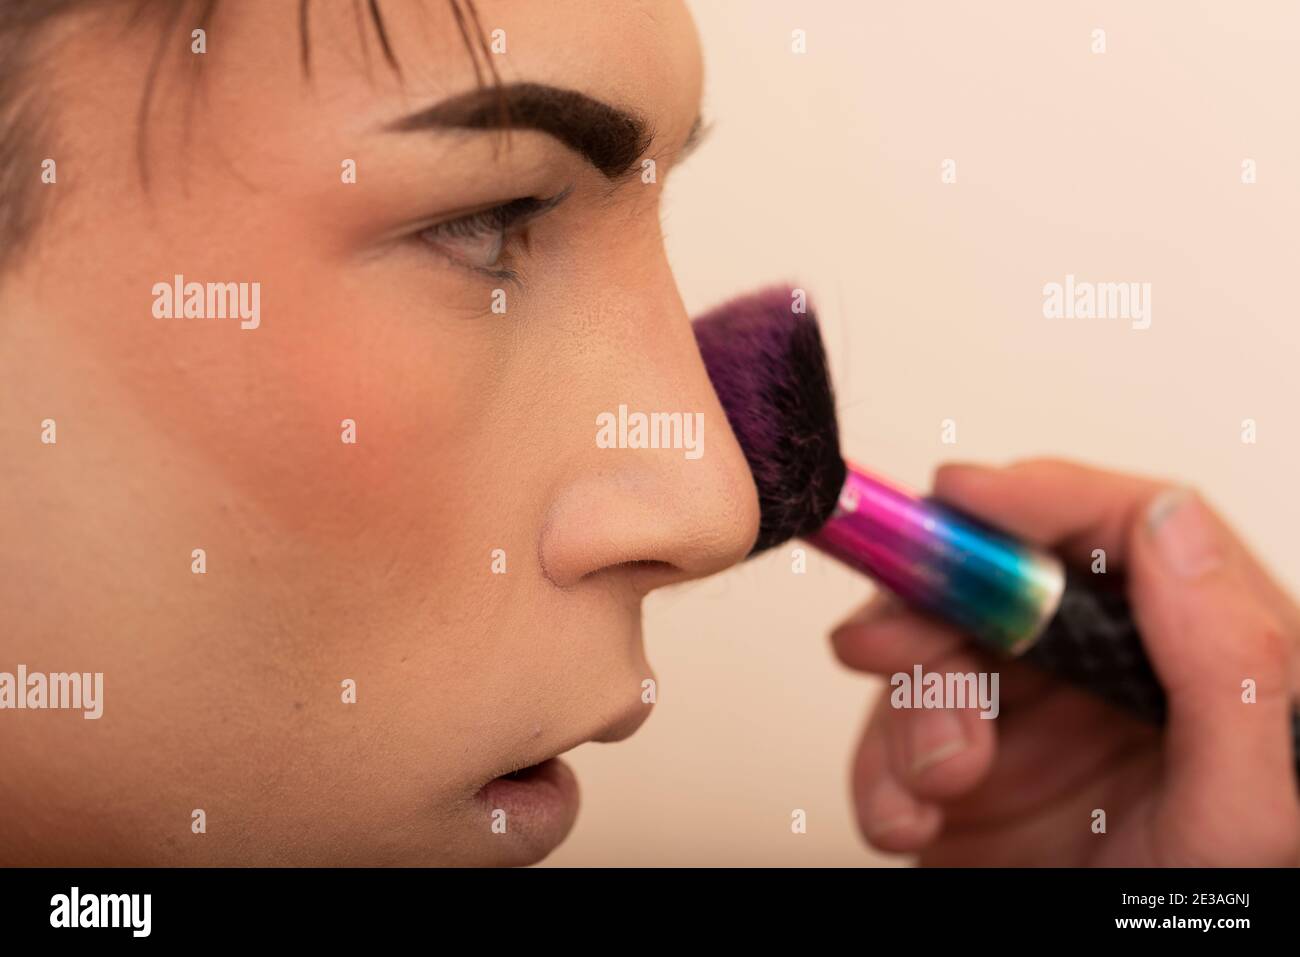 close-up of a young man applying makeup with brush Stock Photo